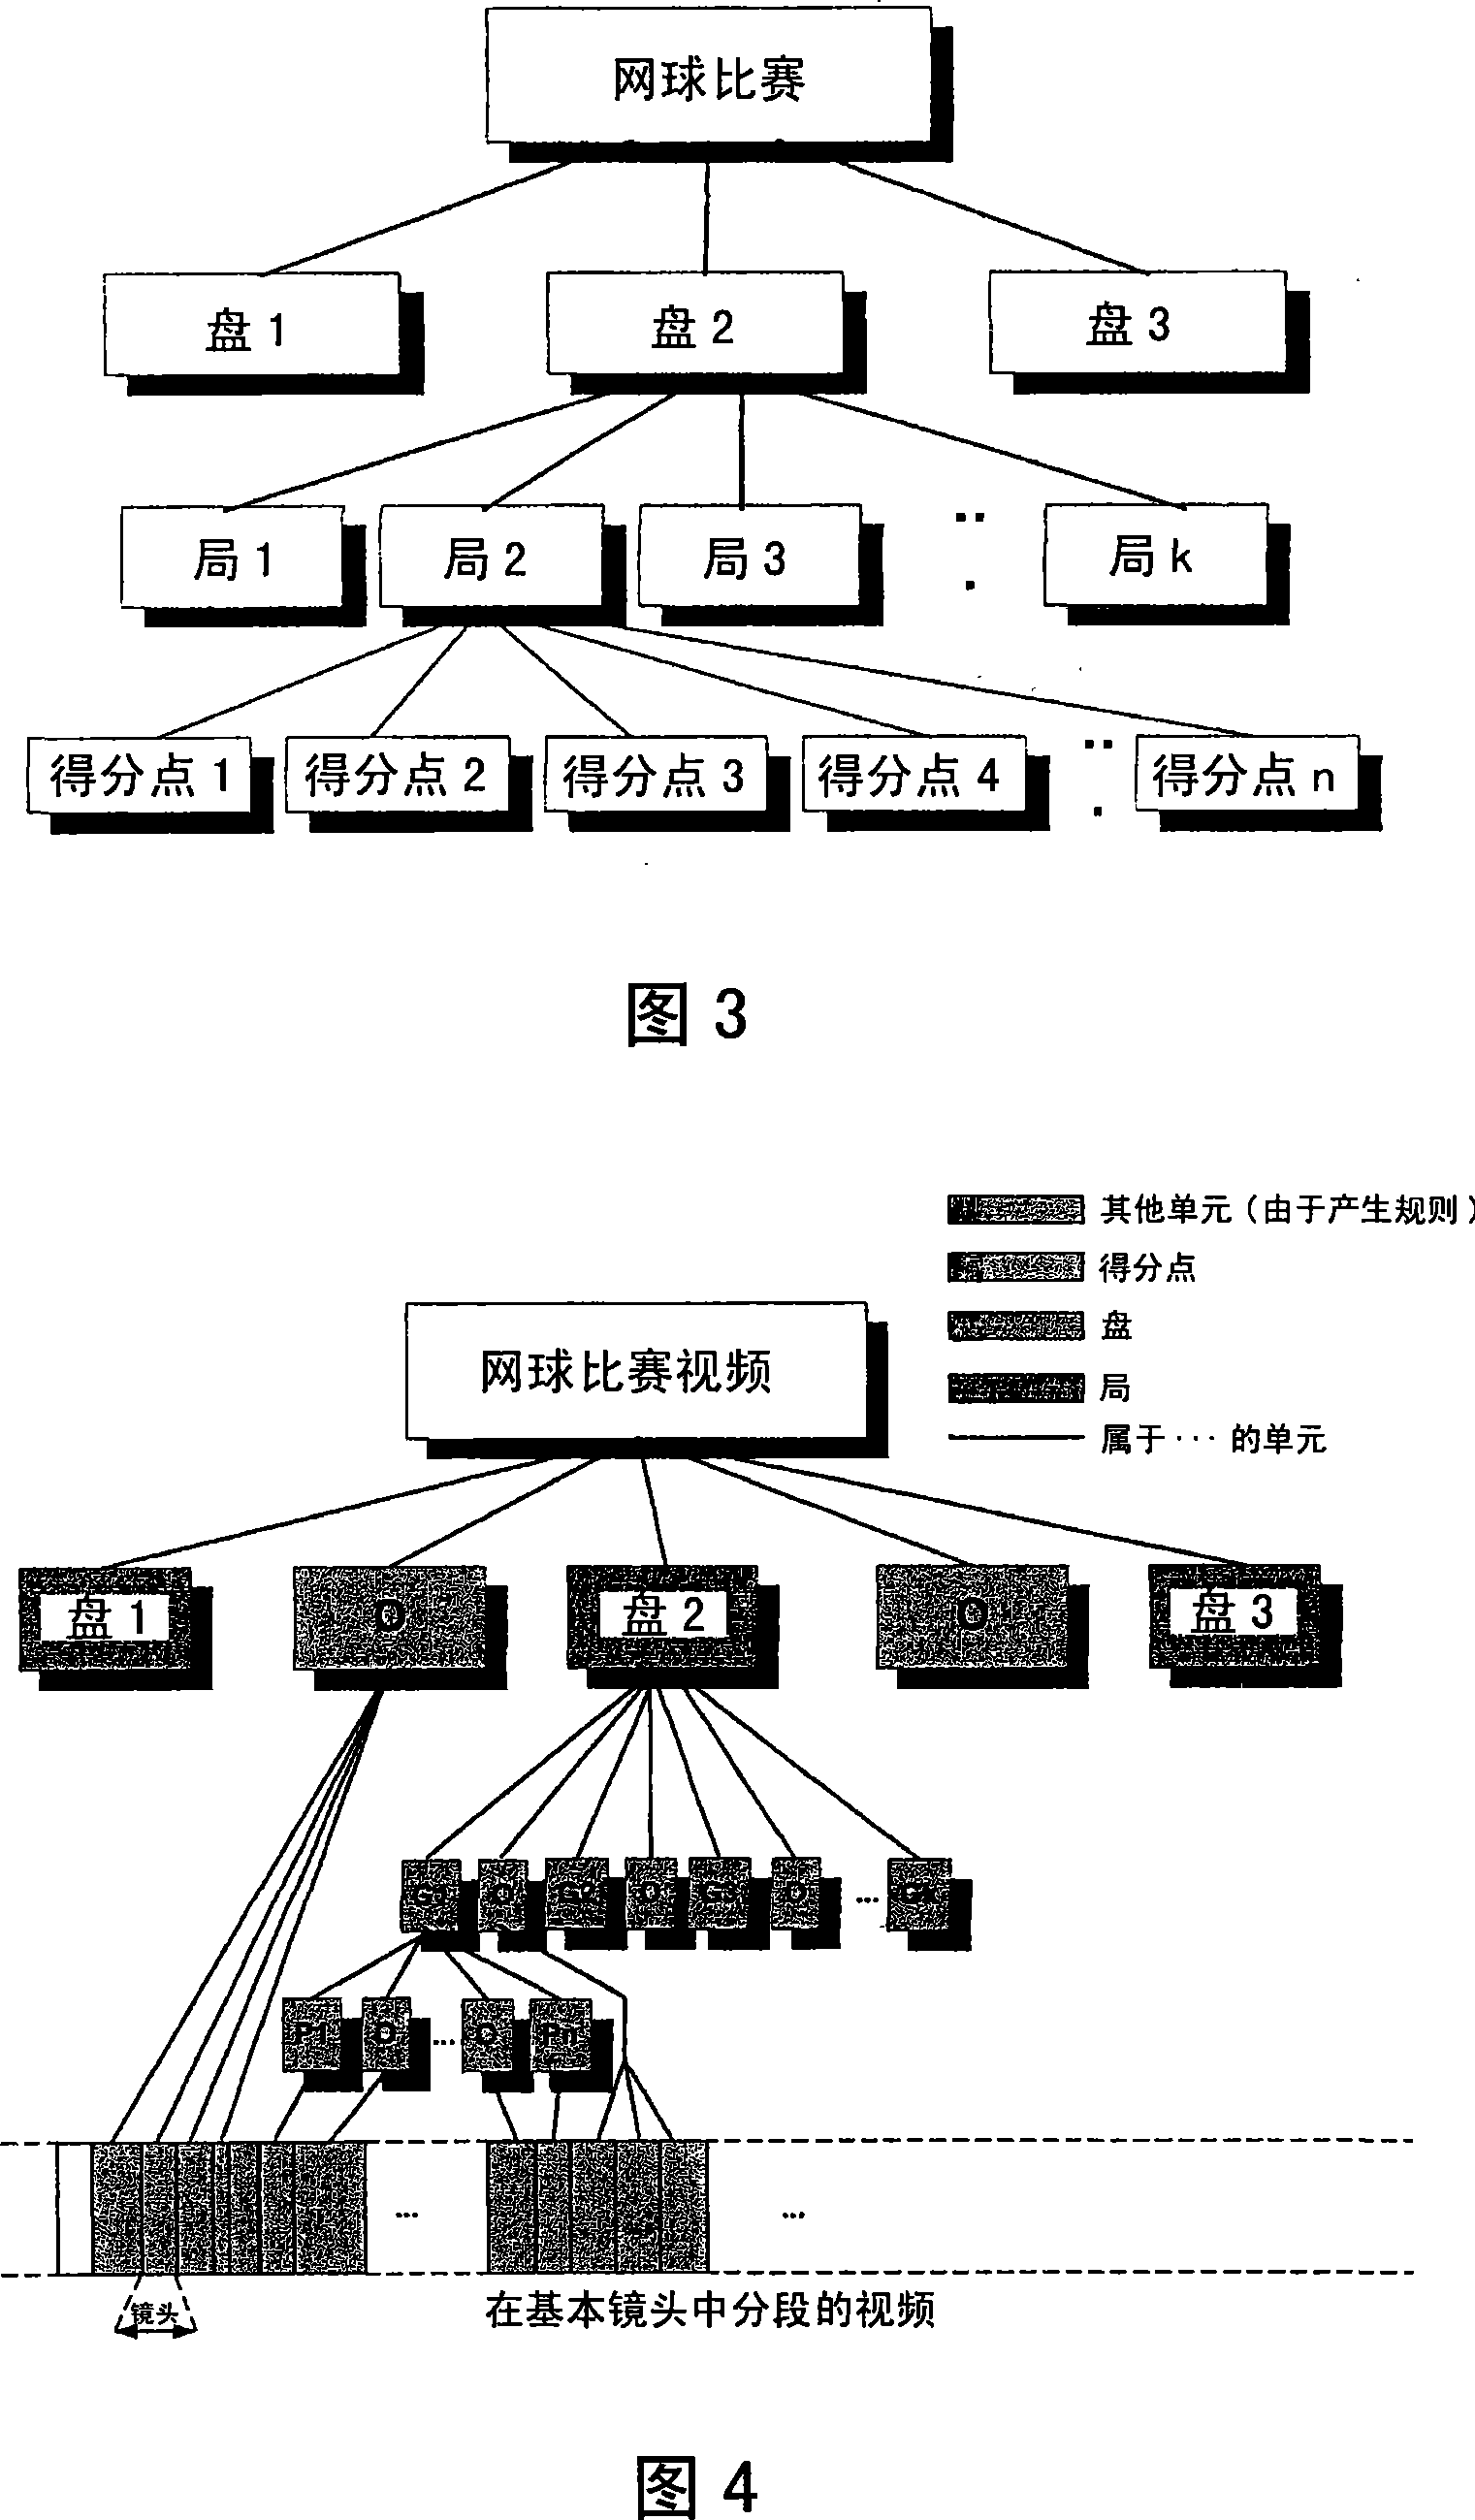 Method for selecting parts of an audiovisual programme and device therefor